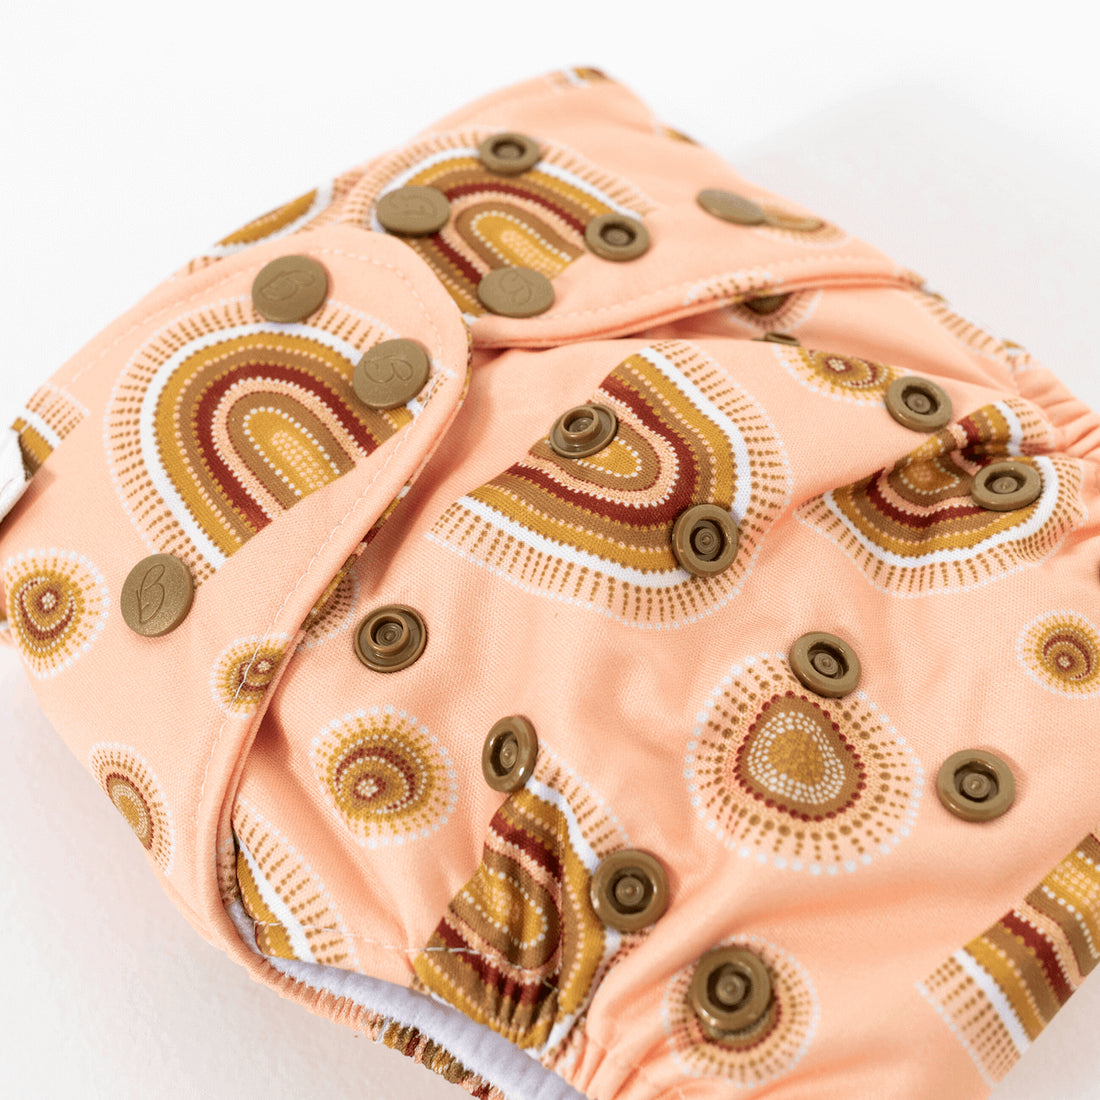 Bare and Boho: One Size AI2 Cloth Nappy with Bamboo Inserts